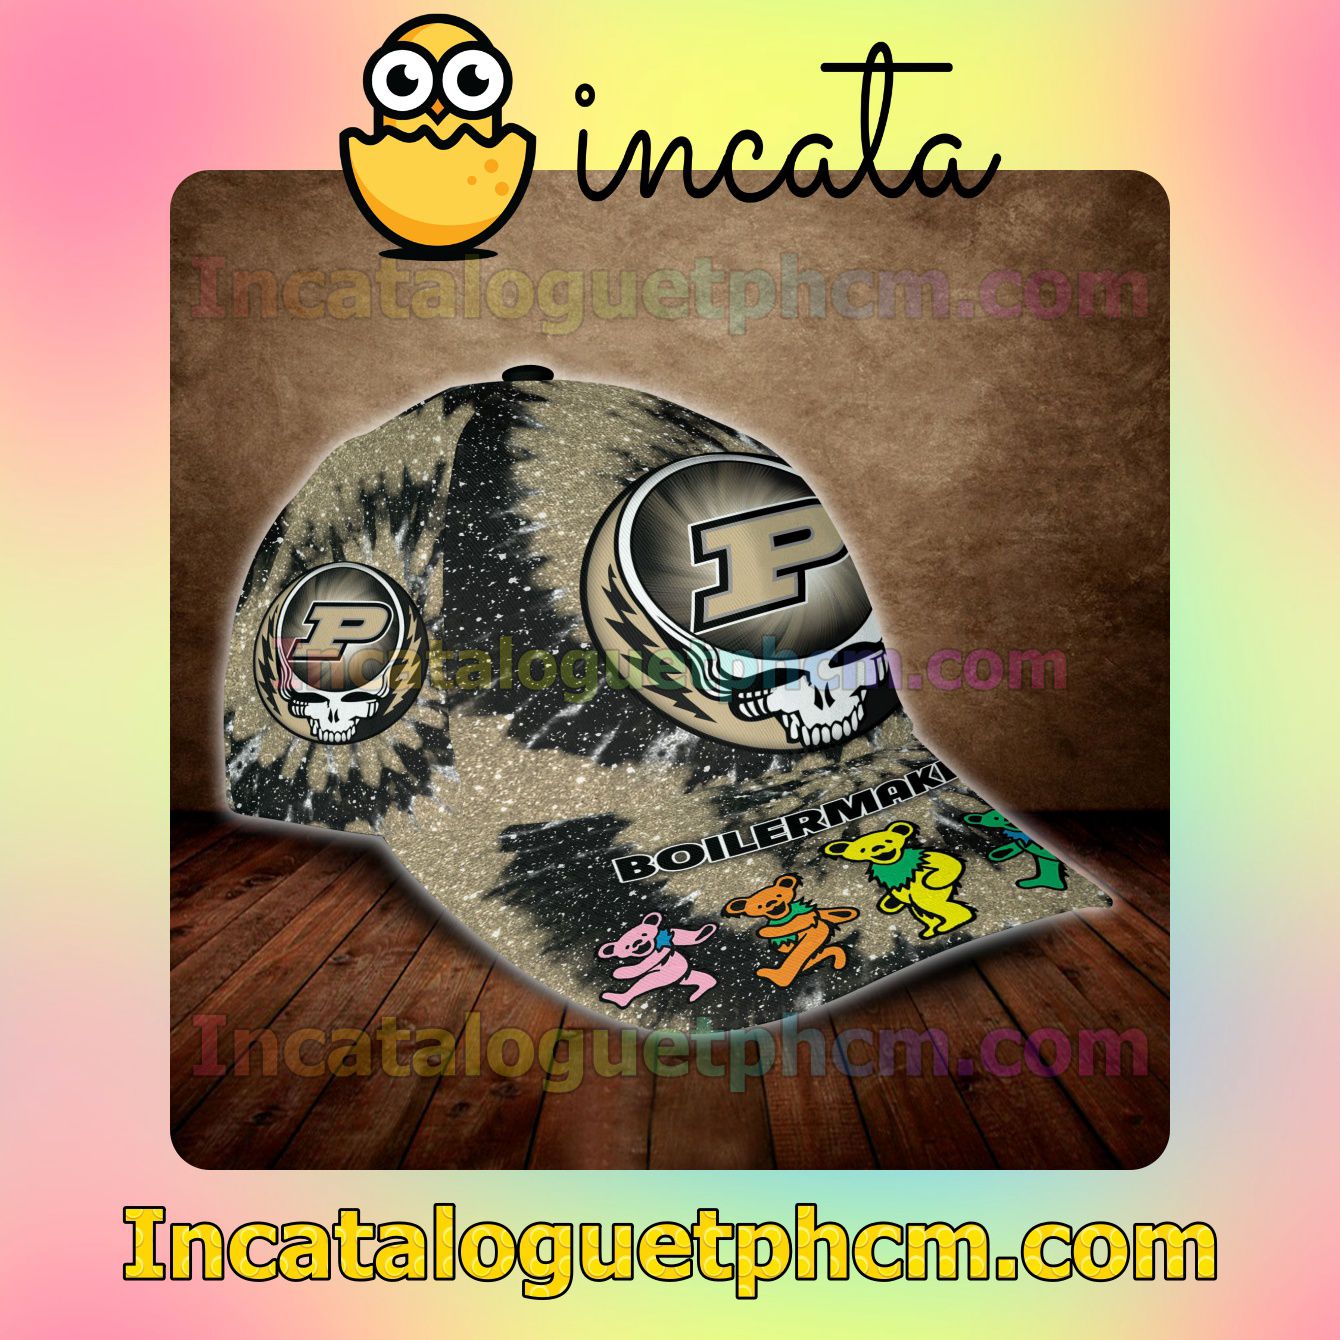 Around Me Purdue Boilermakers NCAA & Grateful Dead Band Customized Hat Caps